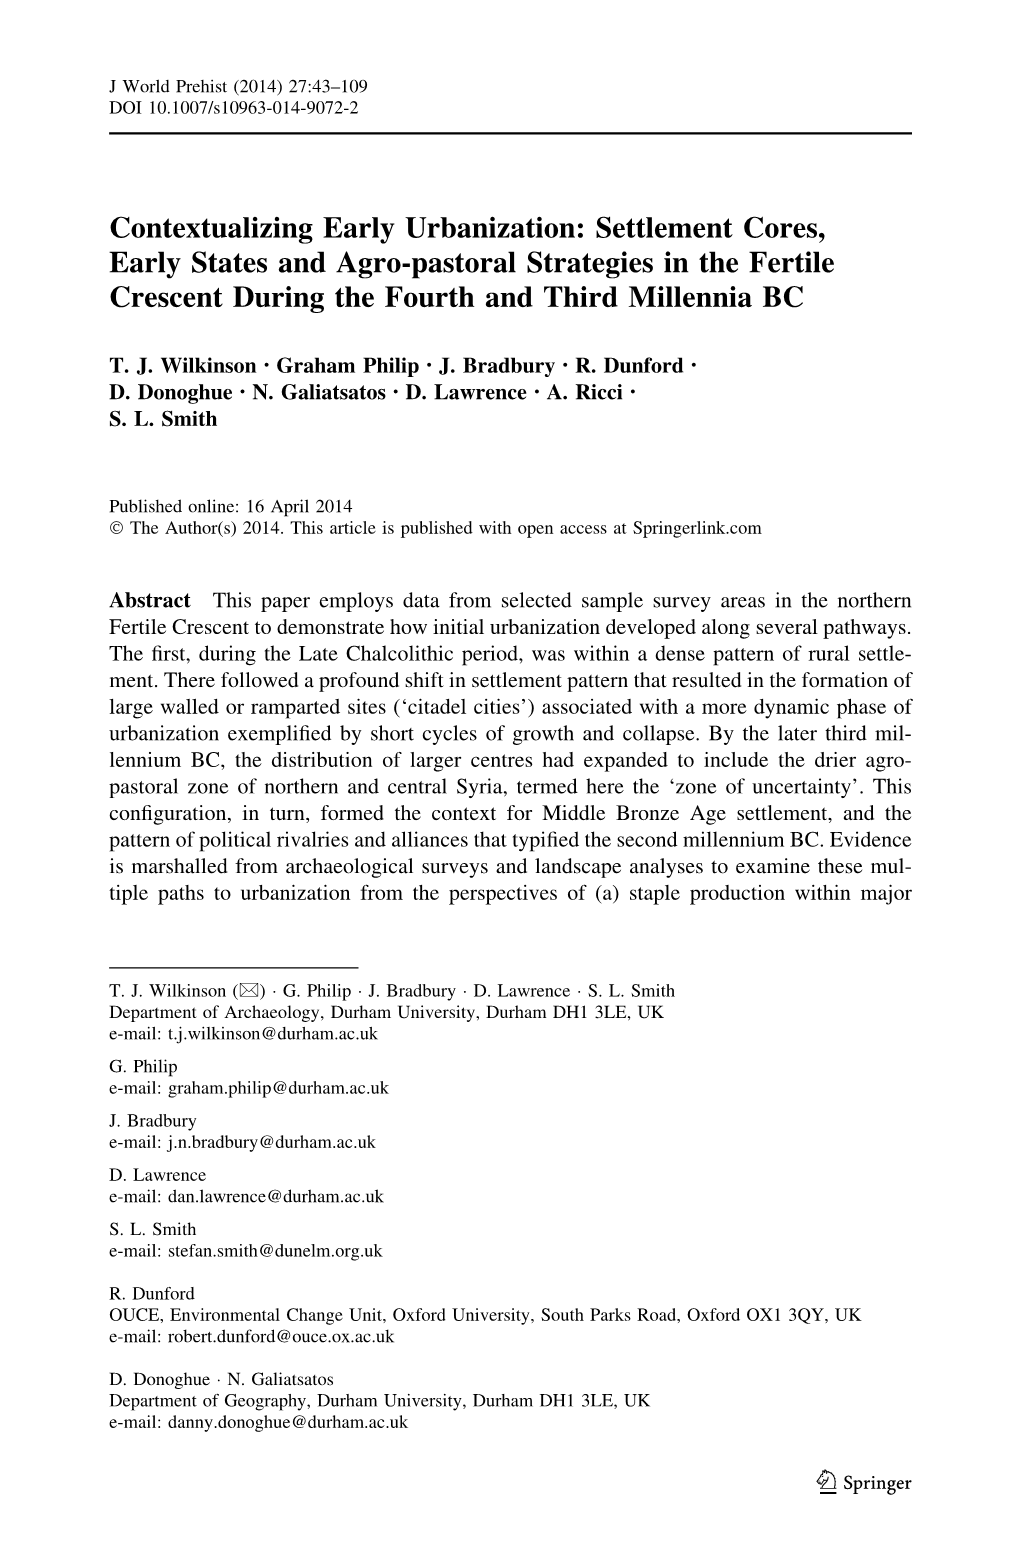 Contextualizing Early Urbanization: Settlement Cores, Early States and Agro-Pastoral Strategies in the Fertile Crescent During the Fourth and Third Millennia BC